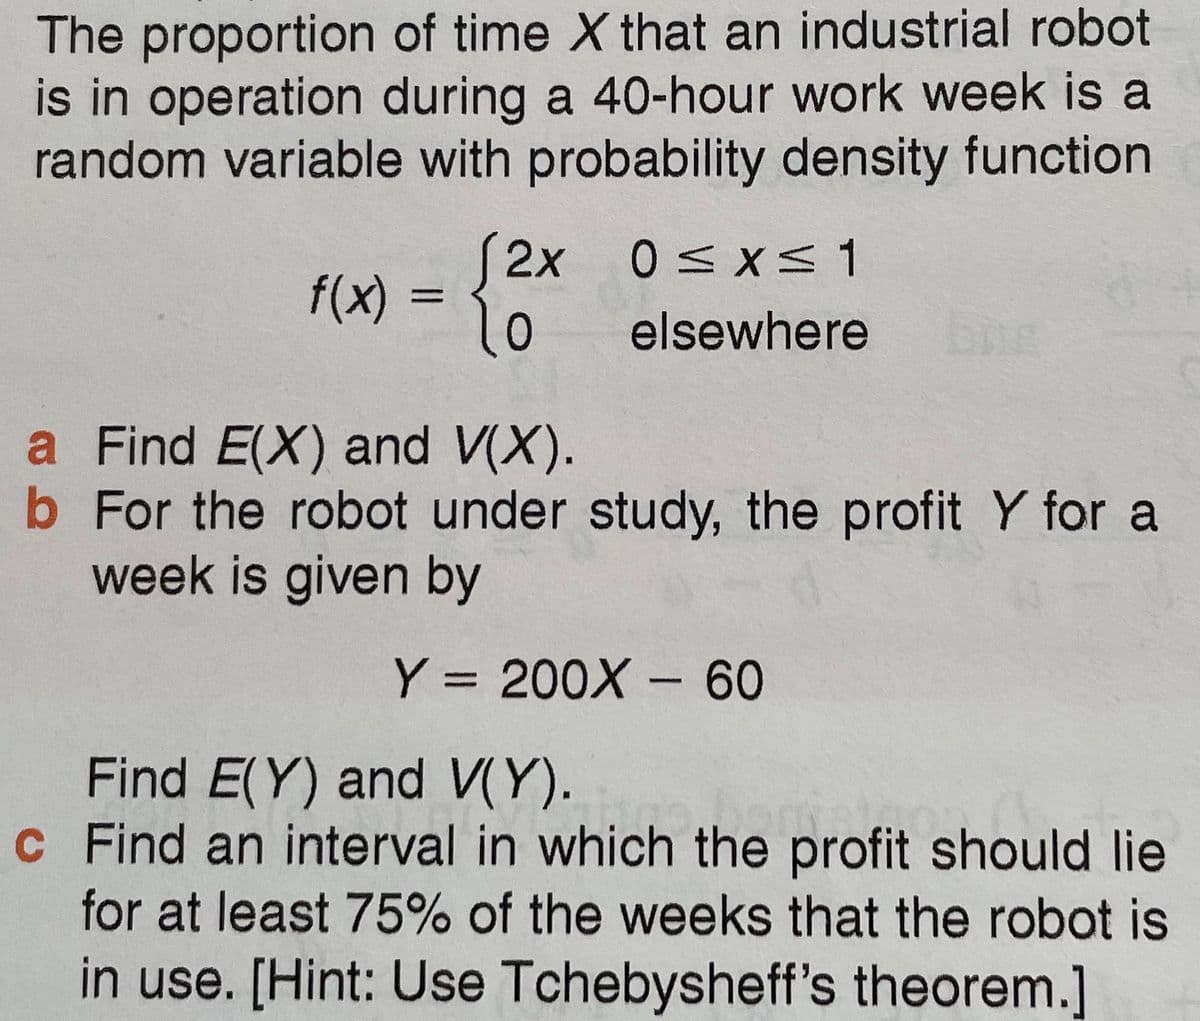 The proportion of time X that an industrial robot
is in operation during a 40-hour work week is a
random variable with probability density function
2x 0<x<1
f(x) =
elsewhere
bng
a Find E(X) and V(X).
b For the robot under study, the profit Y for a
week is given by
Y = 200X -60
Find E(Y) and V(Y).
c Find an interval in which the profit should lie
for at least 75% of the weeks that the robot is
in use. [Hint: Use Tchebysheff's theorem.]
